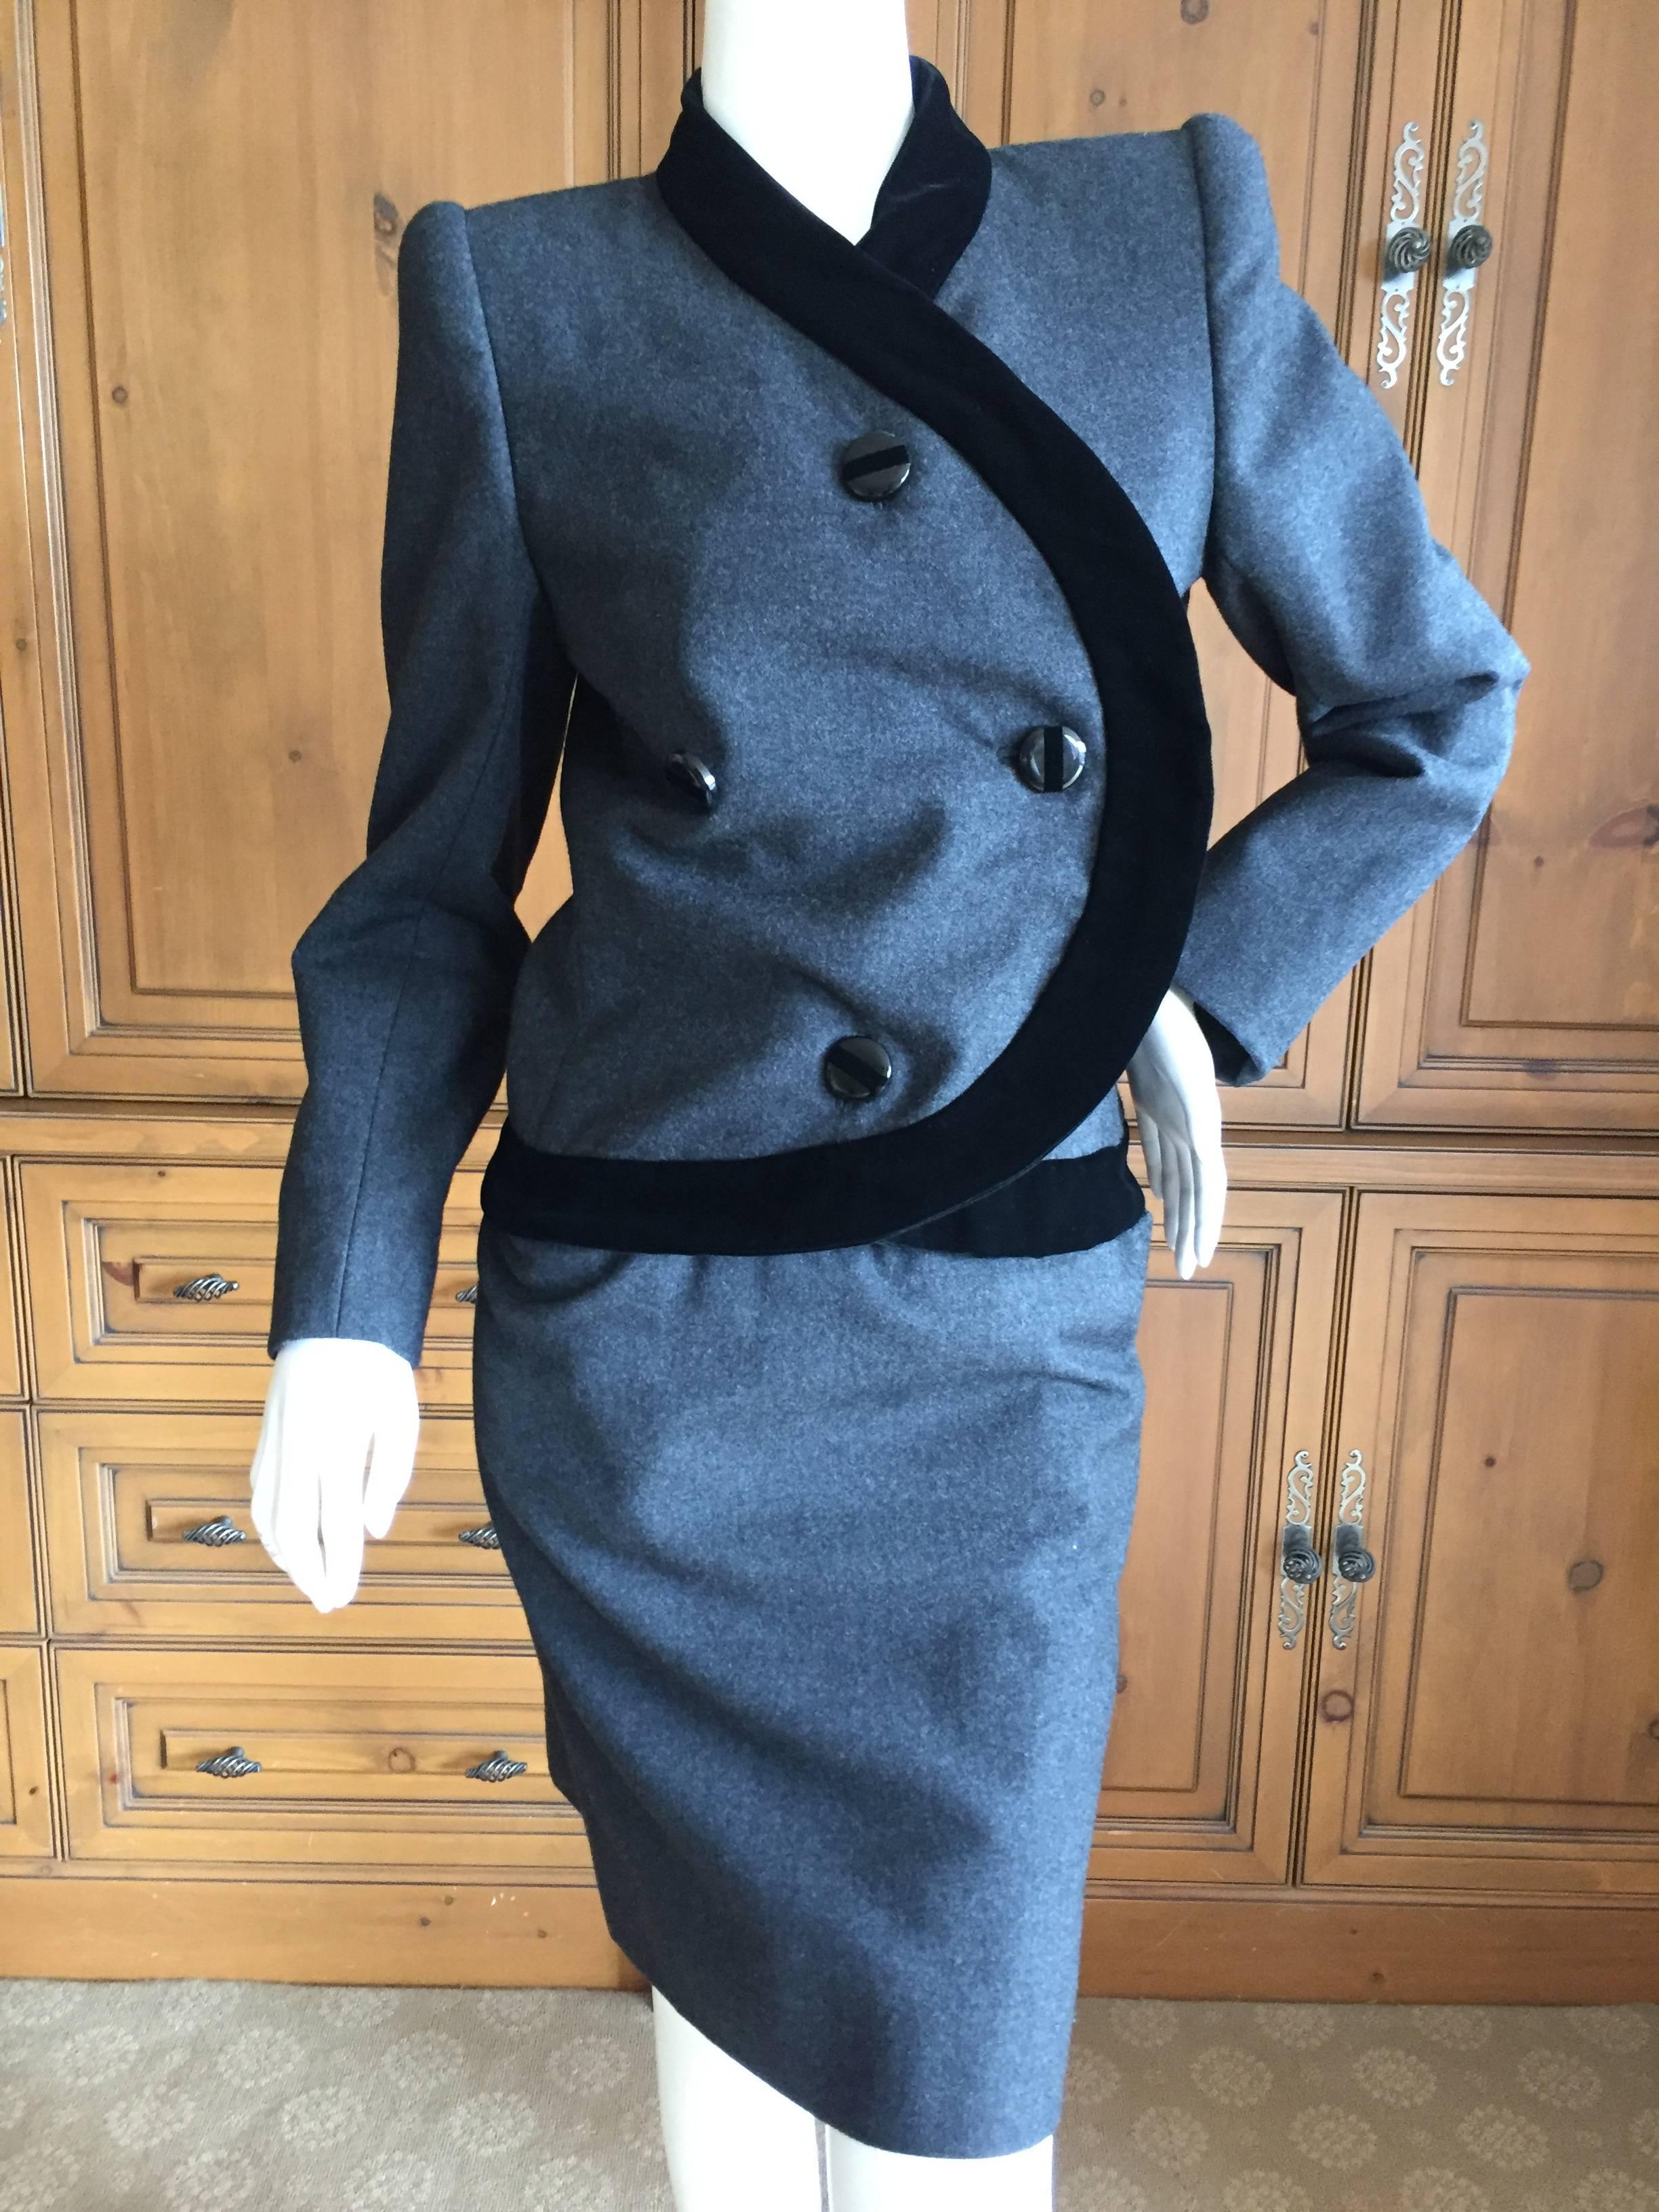 Jacqueline de Ribes Paris Graphic Gray and Black Velvet Accented Skirt Suit

Hand made in France, this is an excellent example of the style of Jacqueline De Ribes, whose collection is currently on exhibit at the Met Museum Costume Institute.